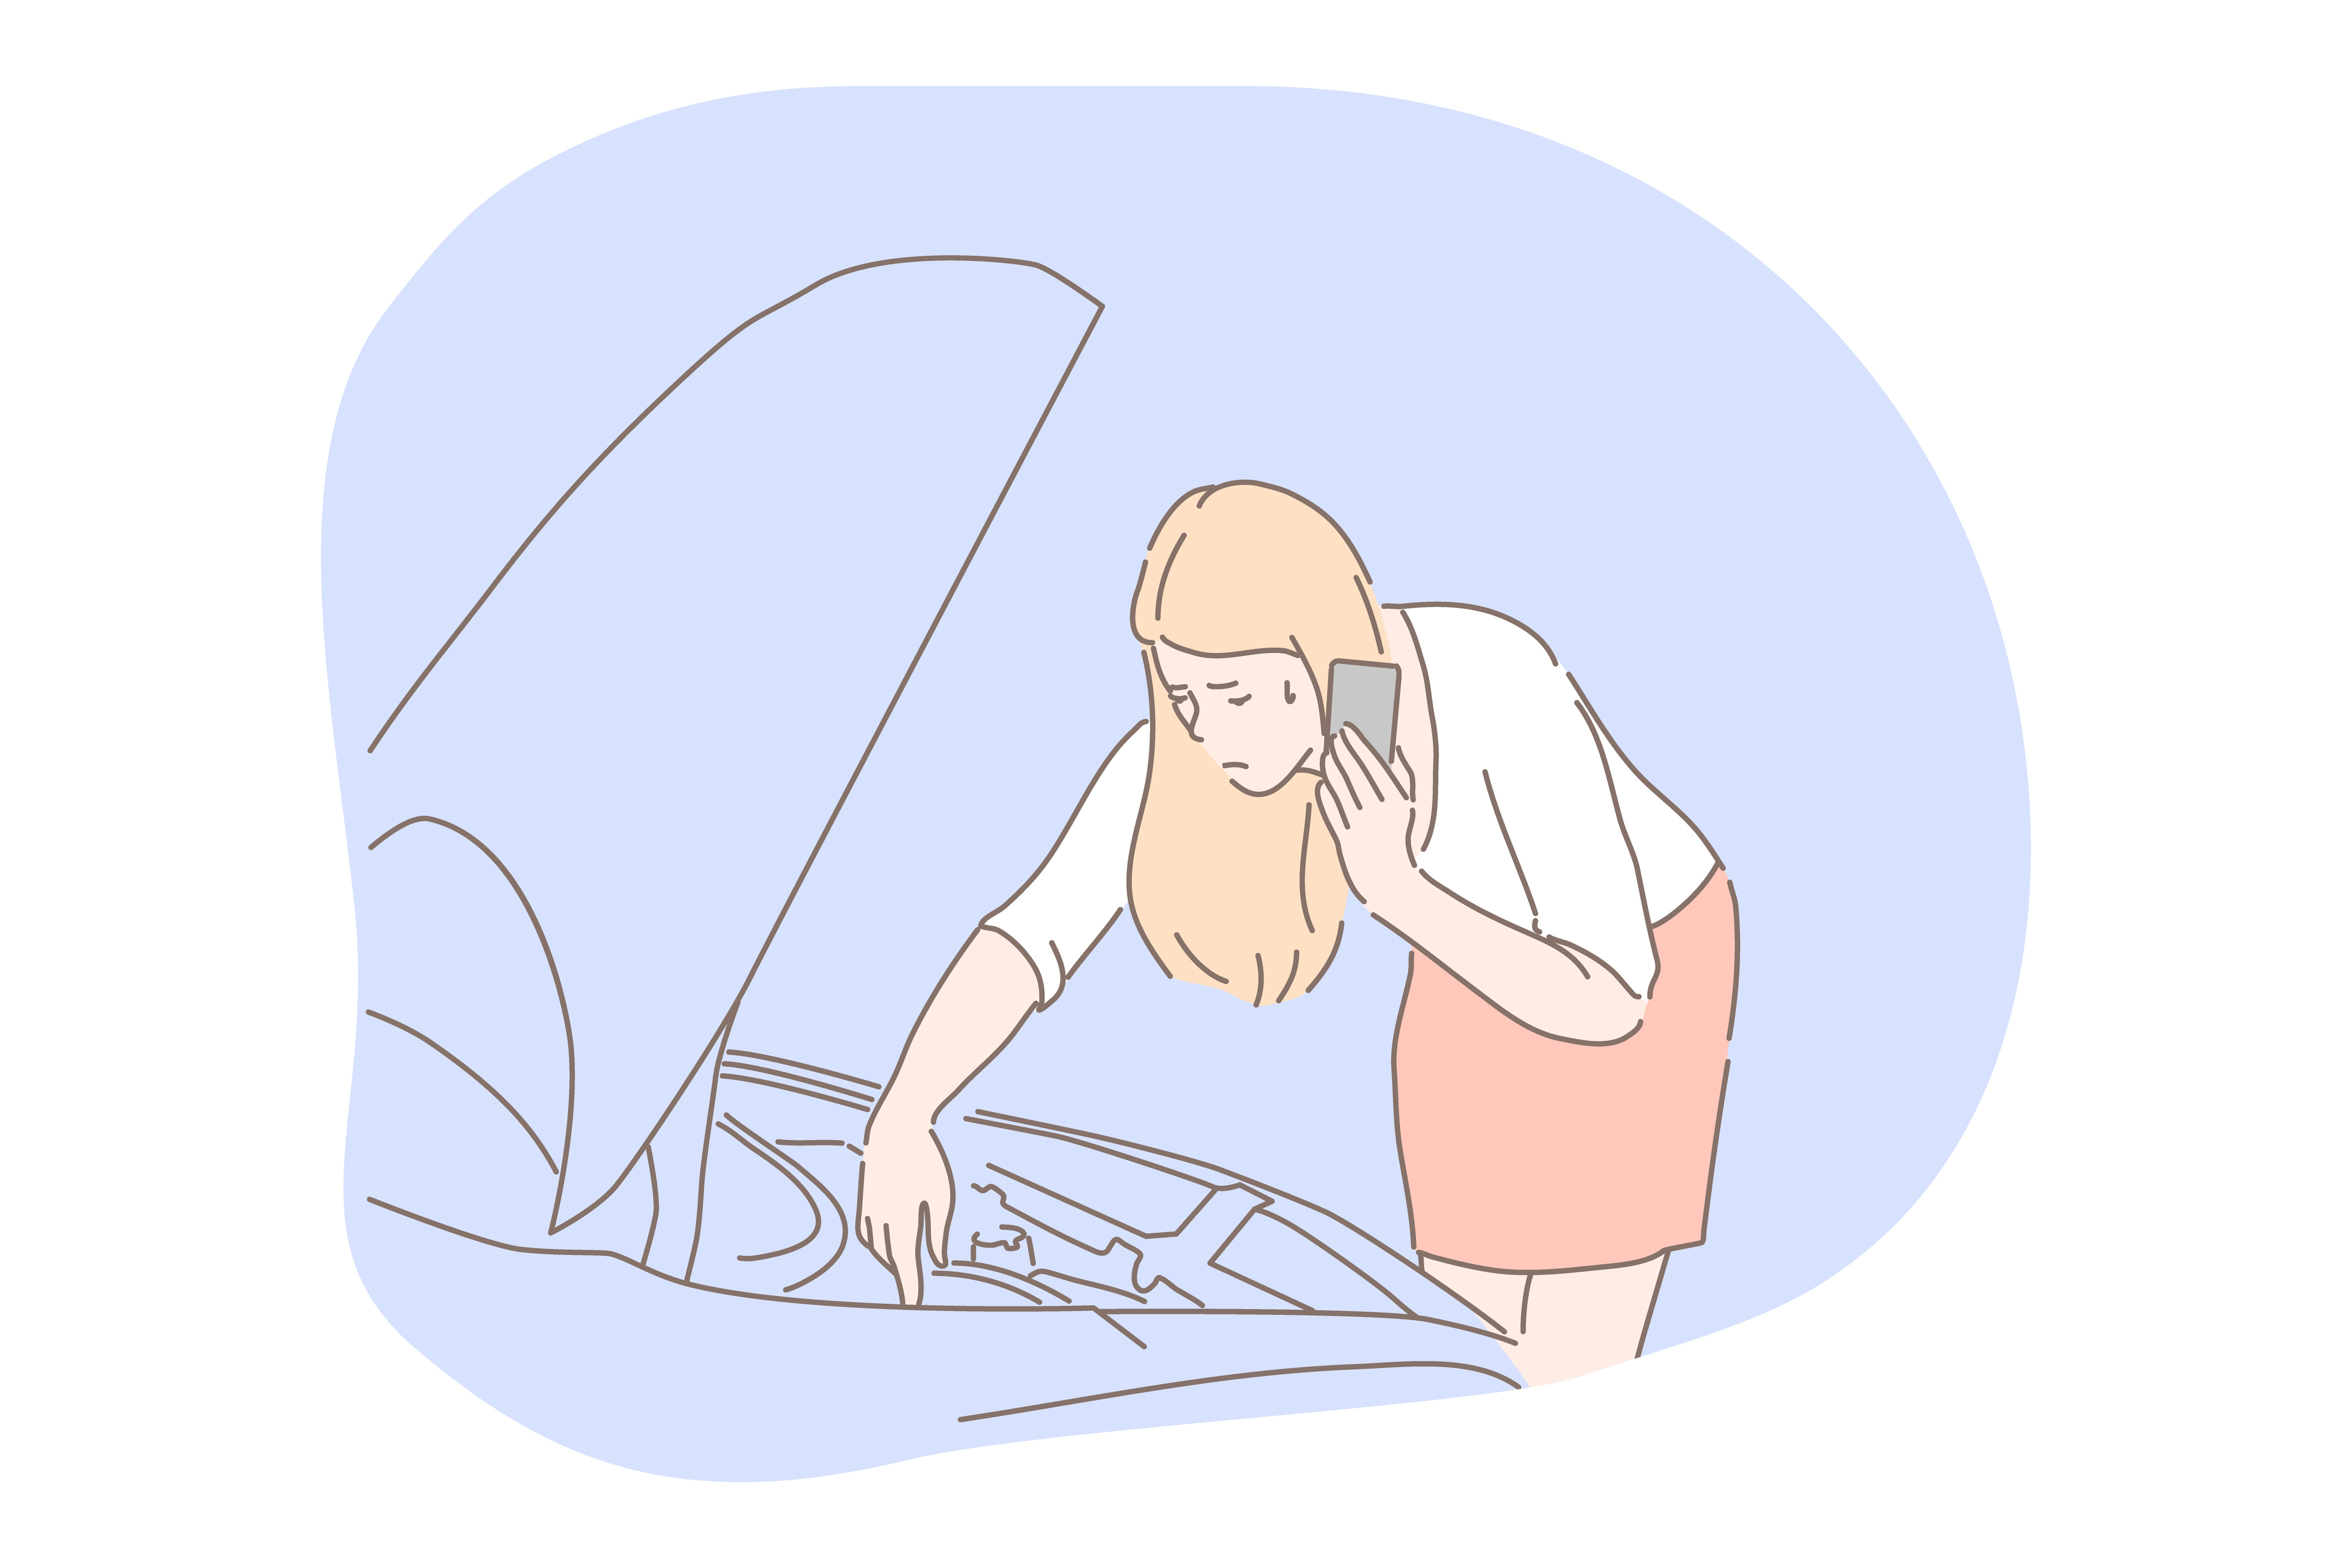 Women and car breakdown concept. Young unhappy frustrated woman driver cartoon character standing near open car hood during breakdown or accident and calling to somebody asking for help on phone . Women and car breakdown concept